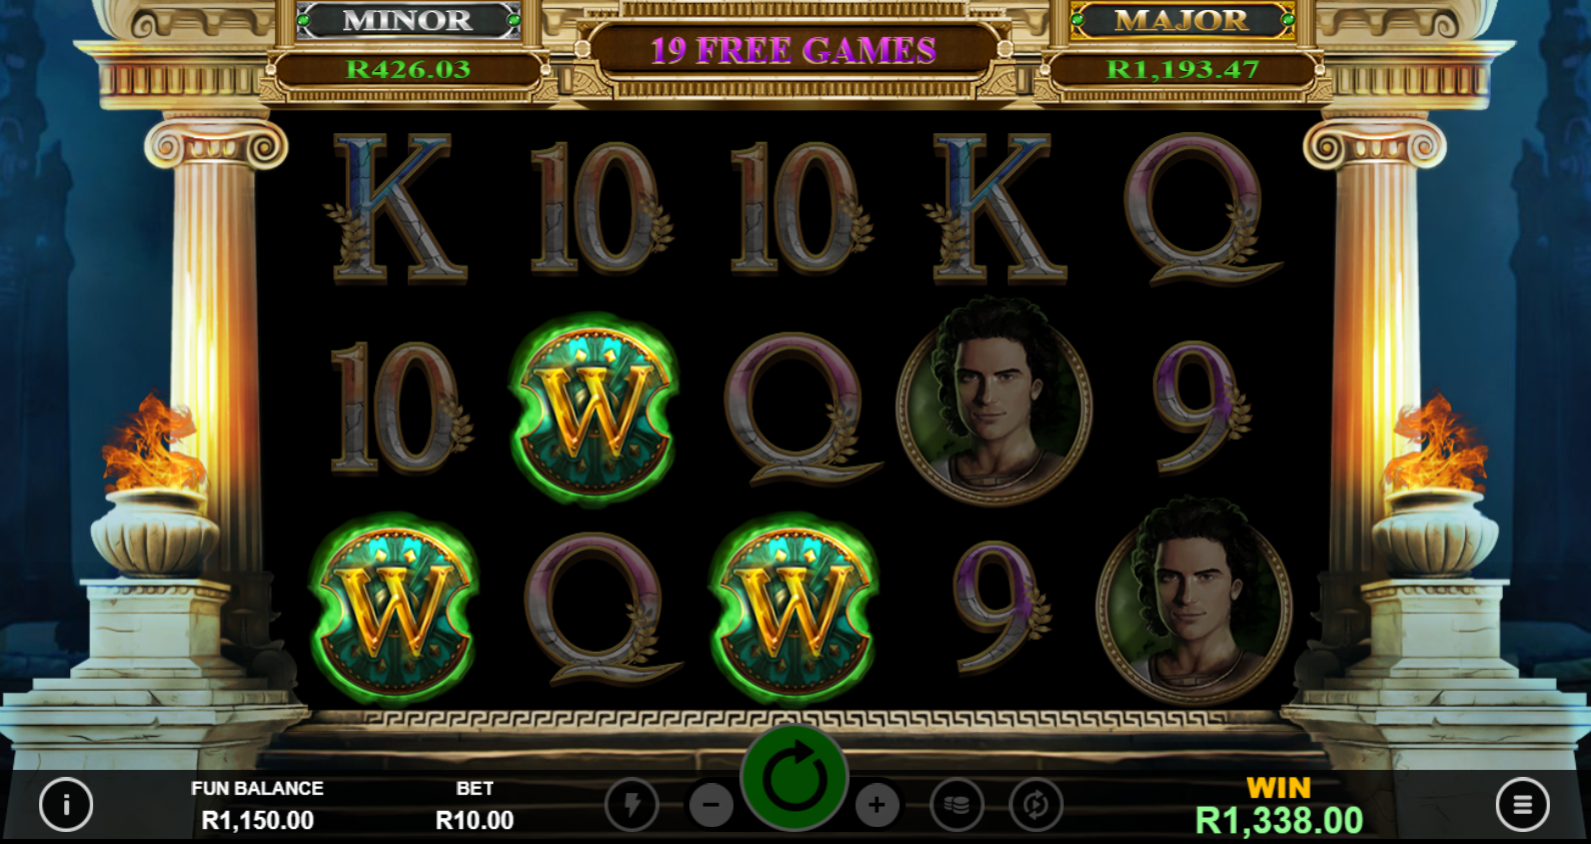 Achilles Deluxe slot packs a punch at Punt Casino, especially during bonus rounds with added features to help players win.